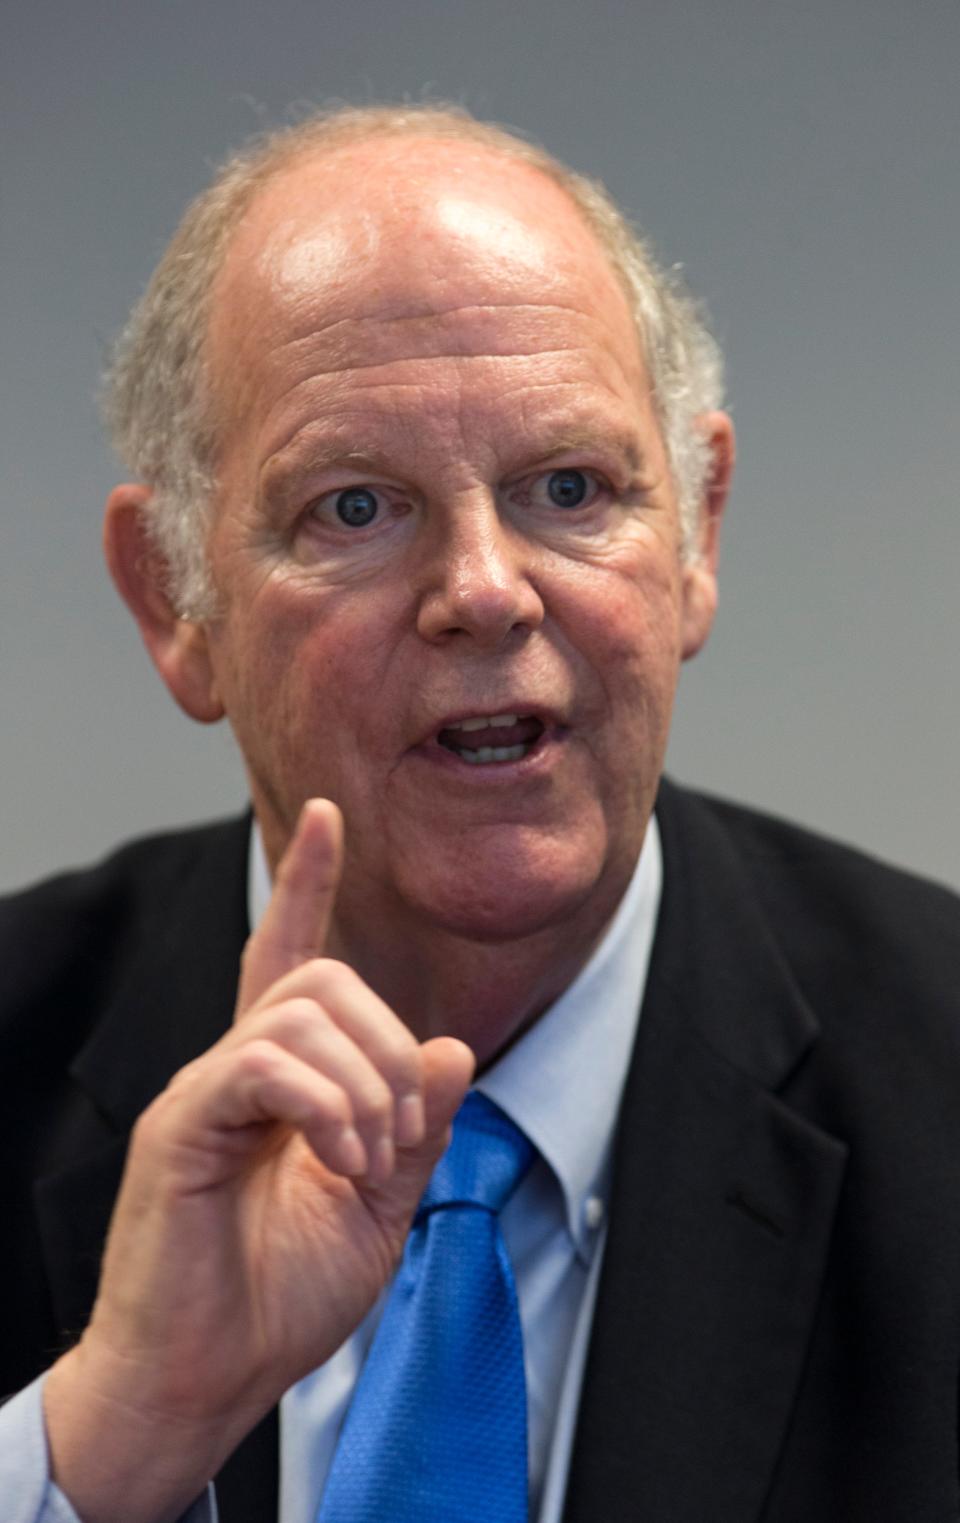 Democratic Rep. Tom O'Halleran hopes to keep his seat in Congress.